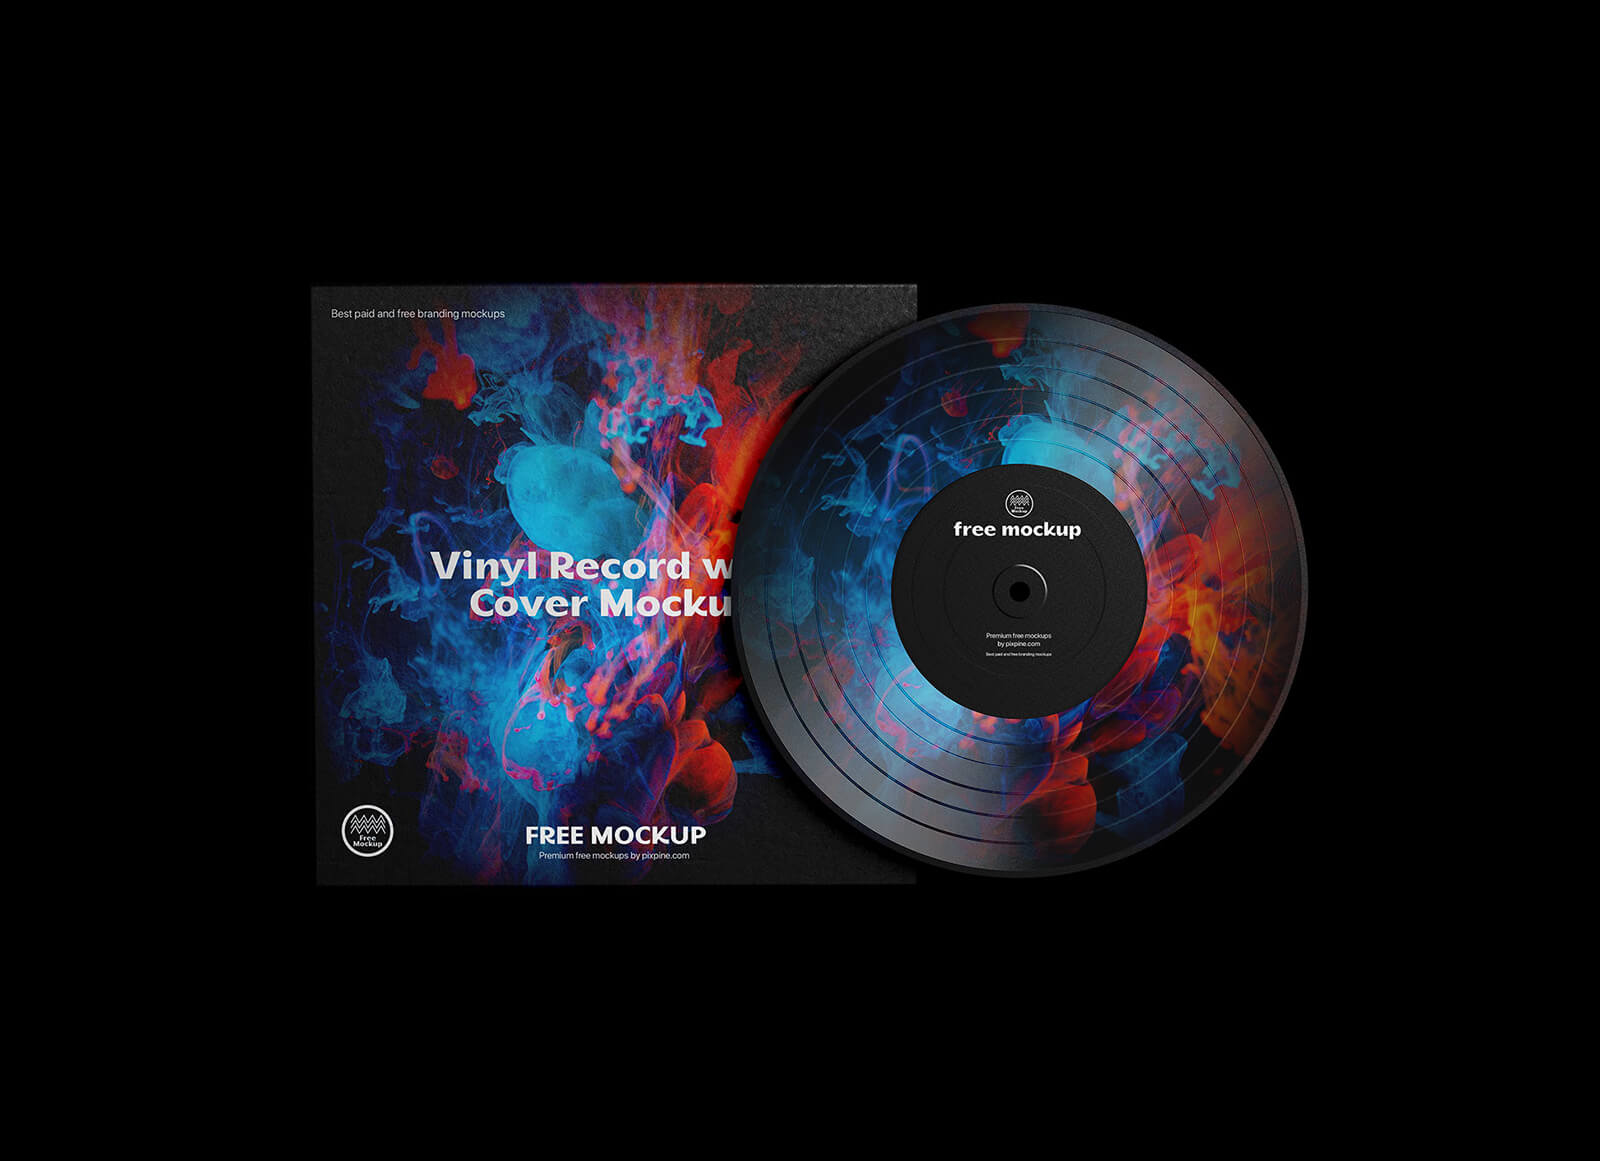 Free Music Vinyl Record With Cover Mockup PSD